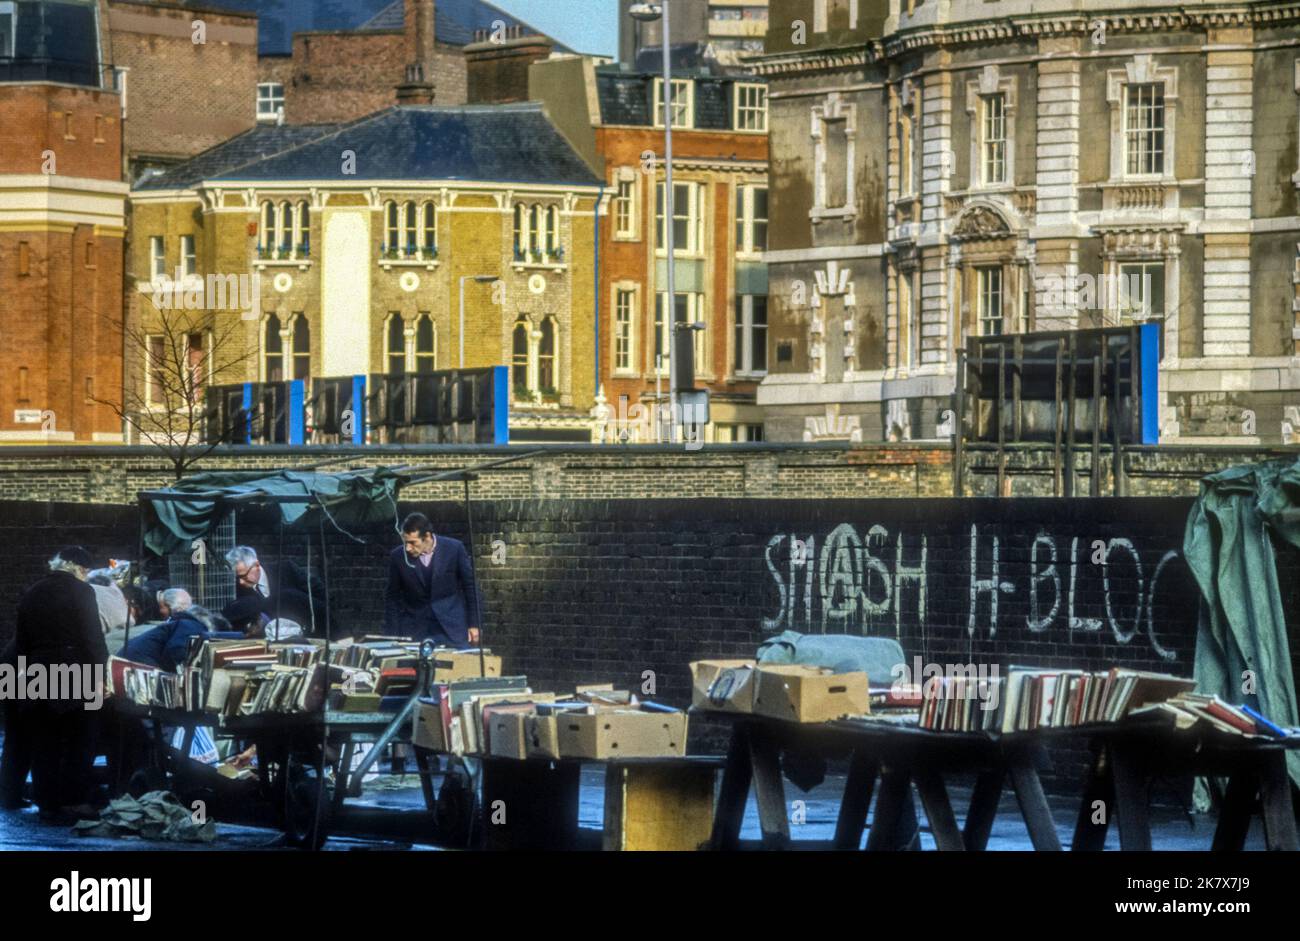 1983 archive image of secondhand book stall and Smash H-Blocks graffiti in Farringdon Road, London. Stock Photo